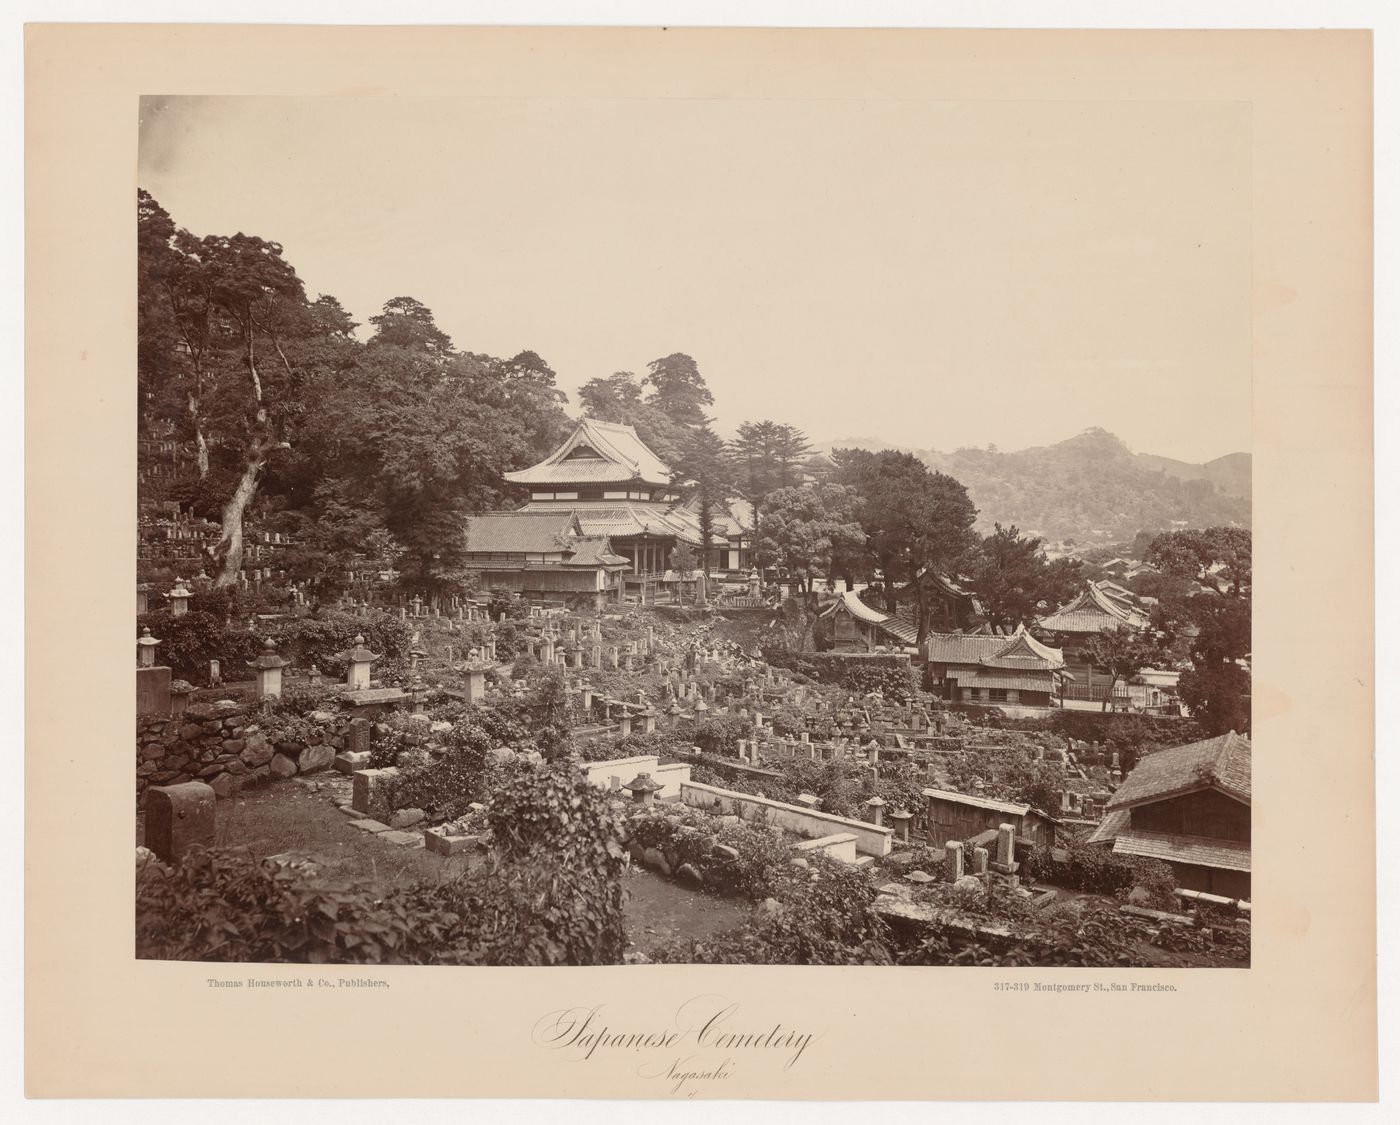 View of a cemetery and the Fukusaiji Temple complex [?], Nagasaki, Japan